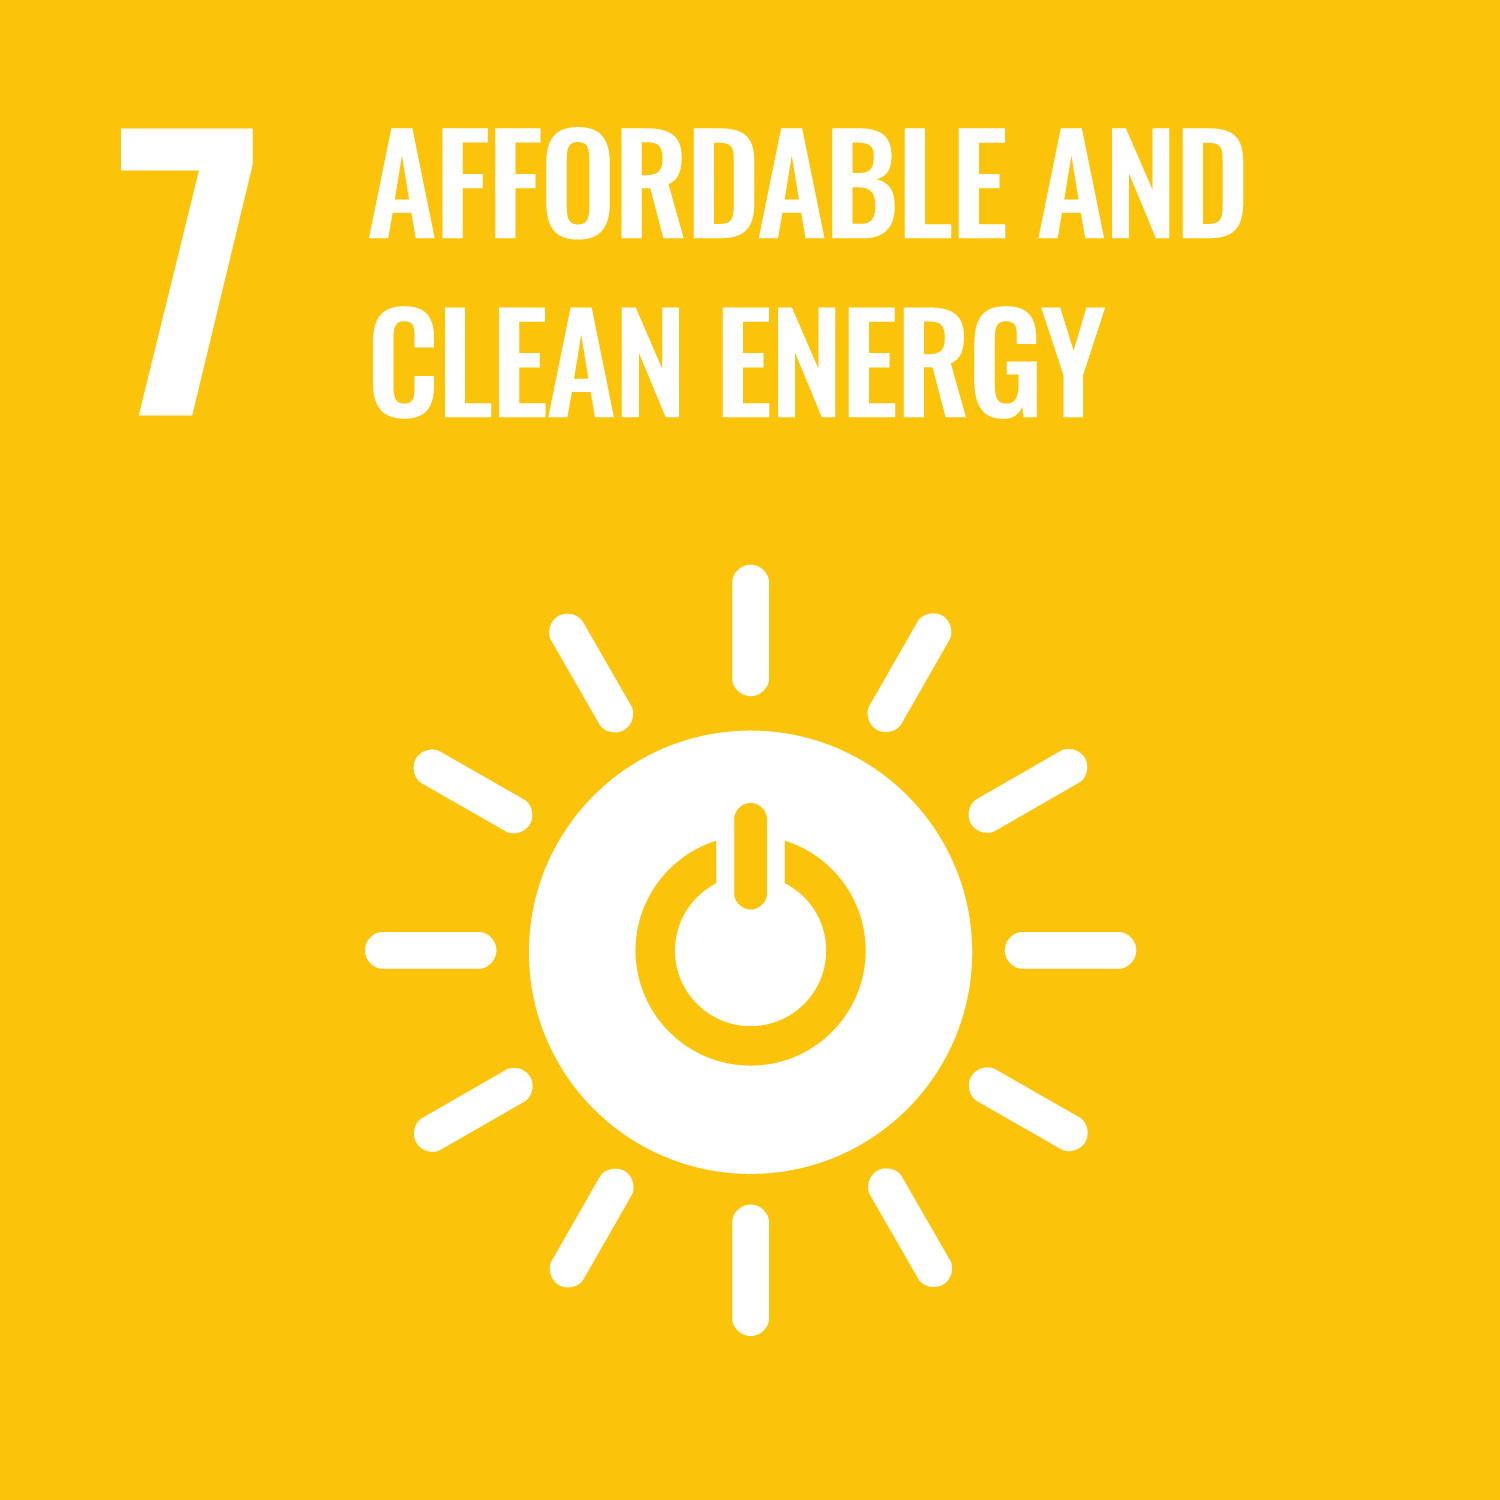 7：AFFORDABLE AND CLEAN ENERGY